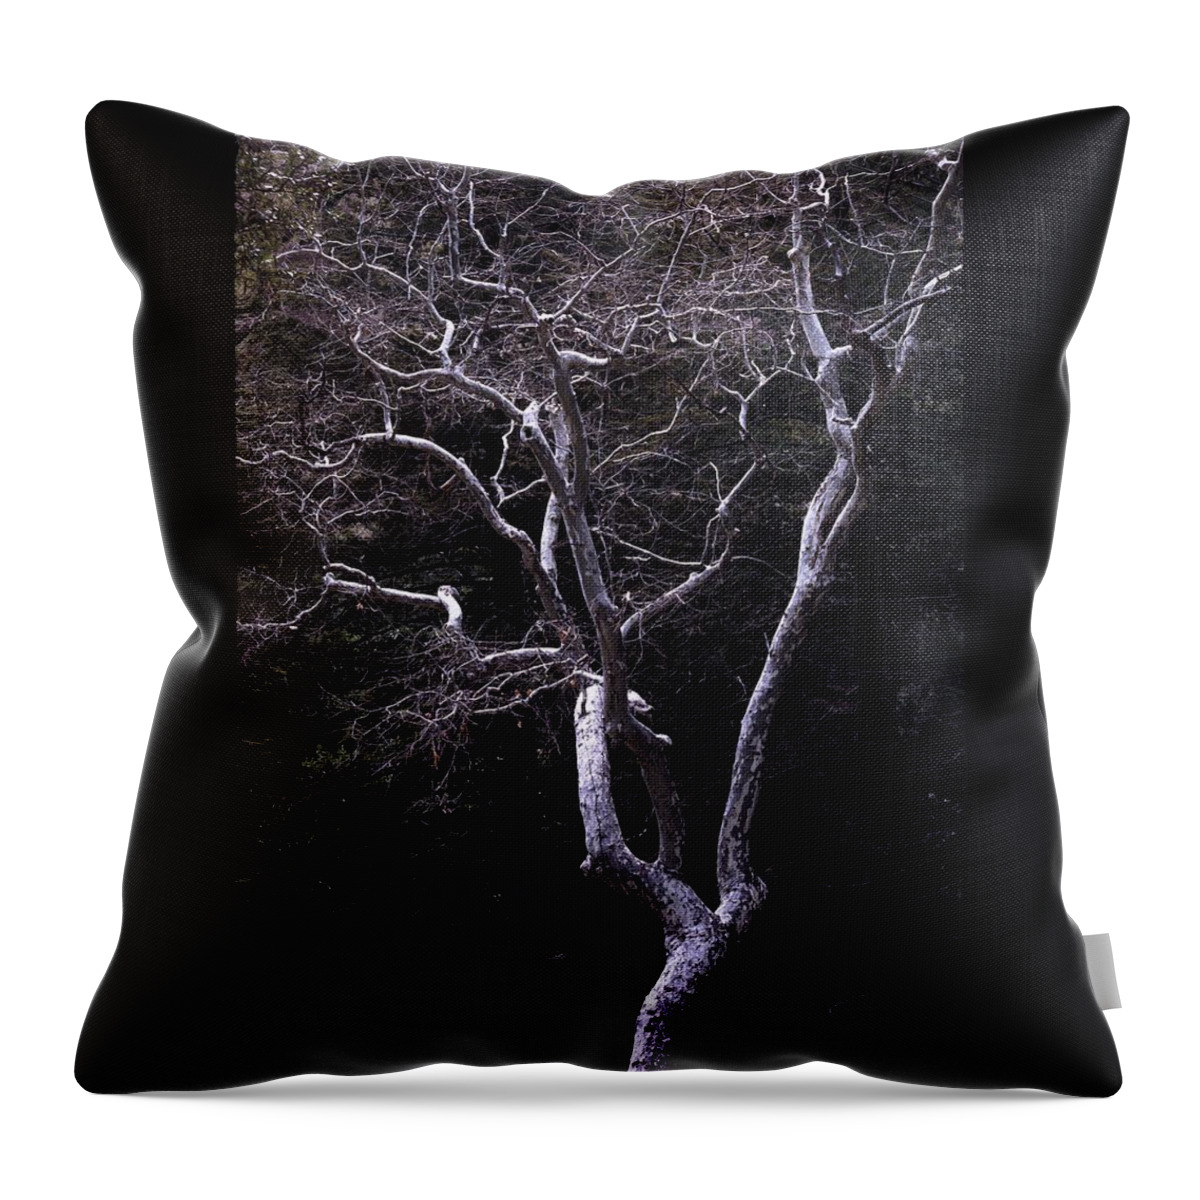 Landscape Throw Pillow featuring the photograph Ghost Tree by Kae Cheatham